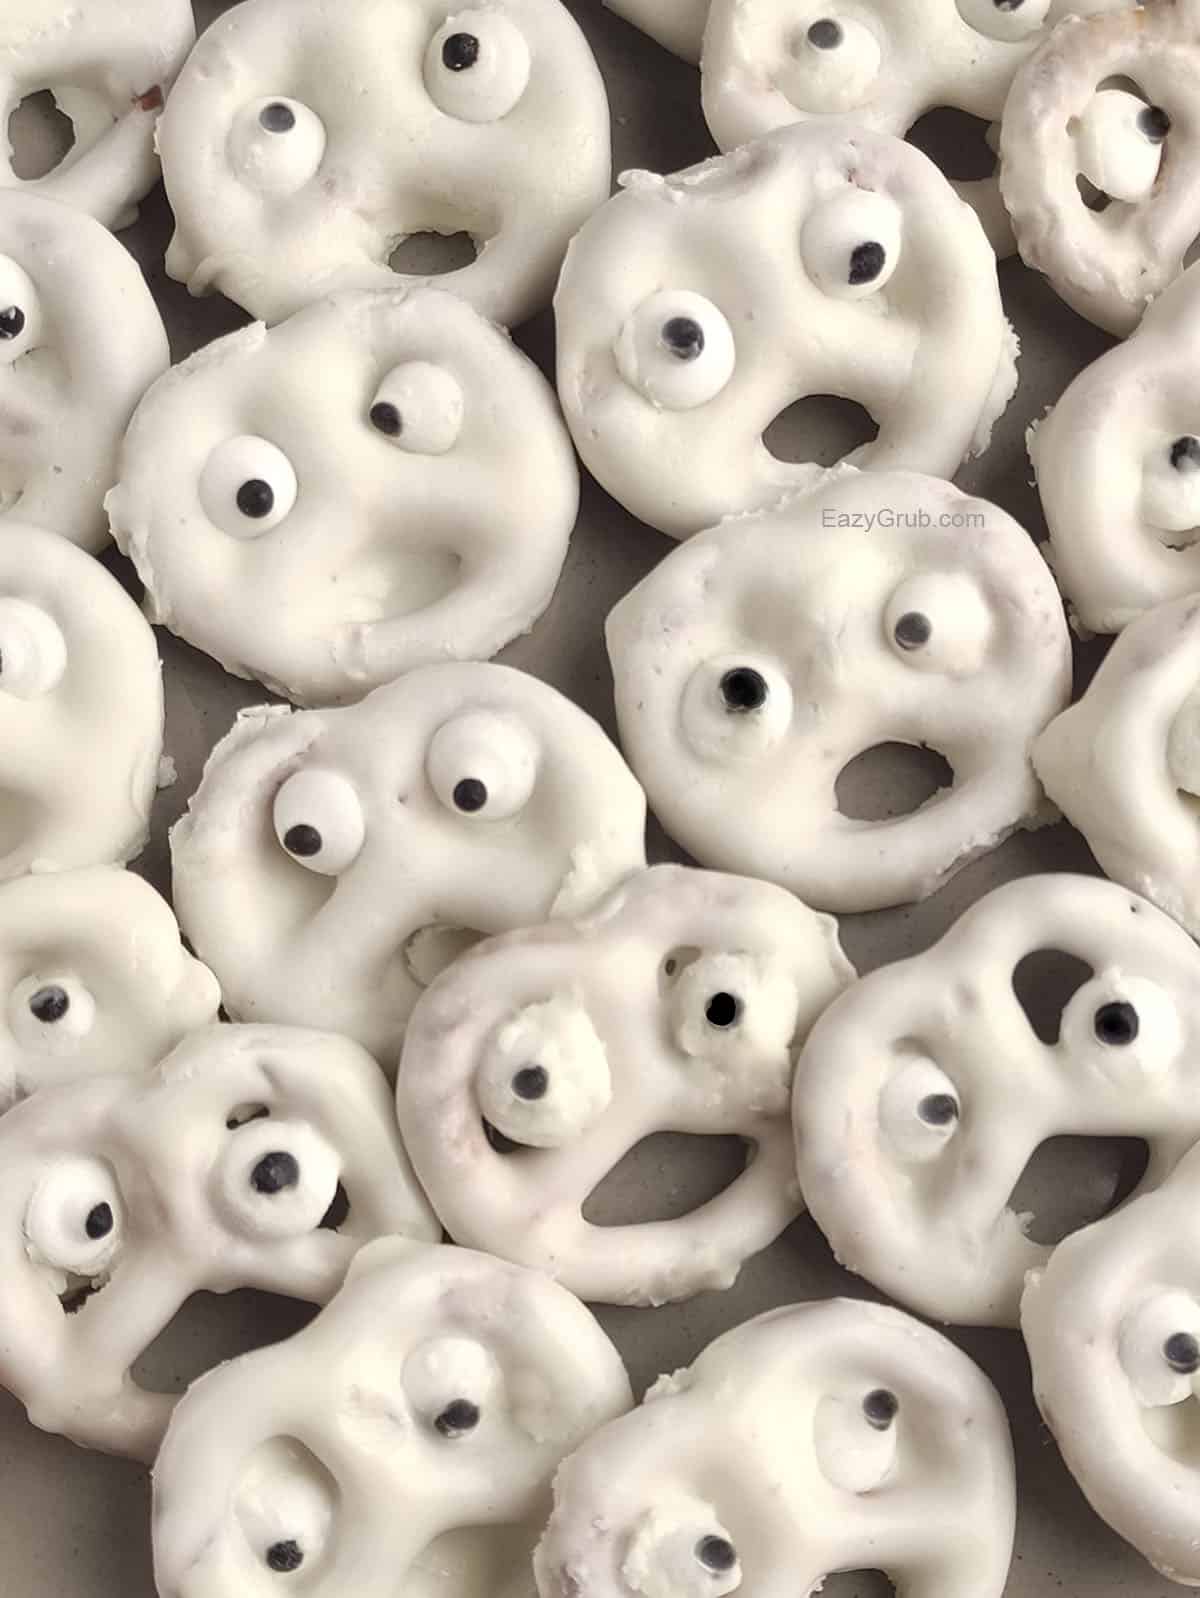 A close up of Pretzel ghosts on a grey plate.